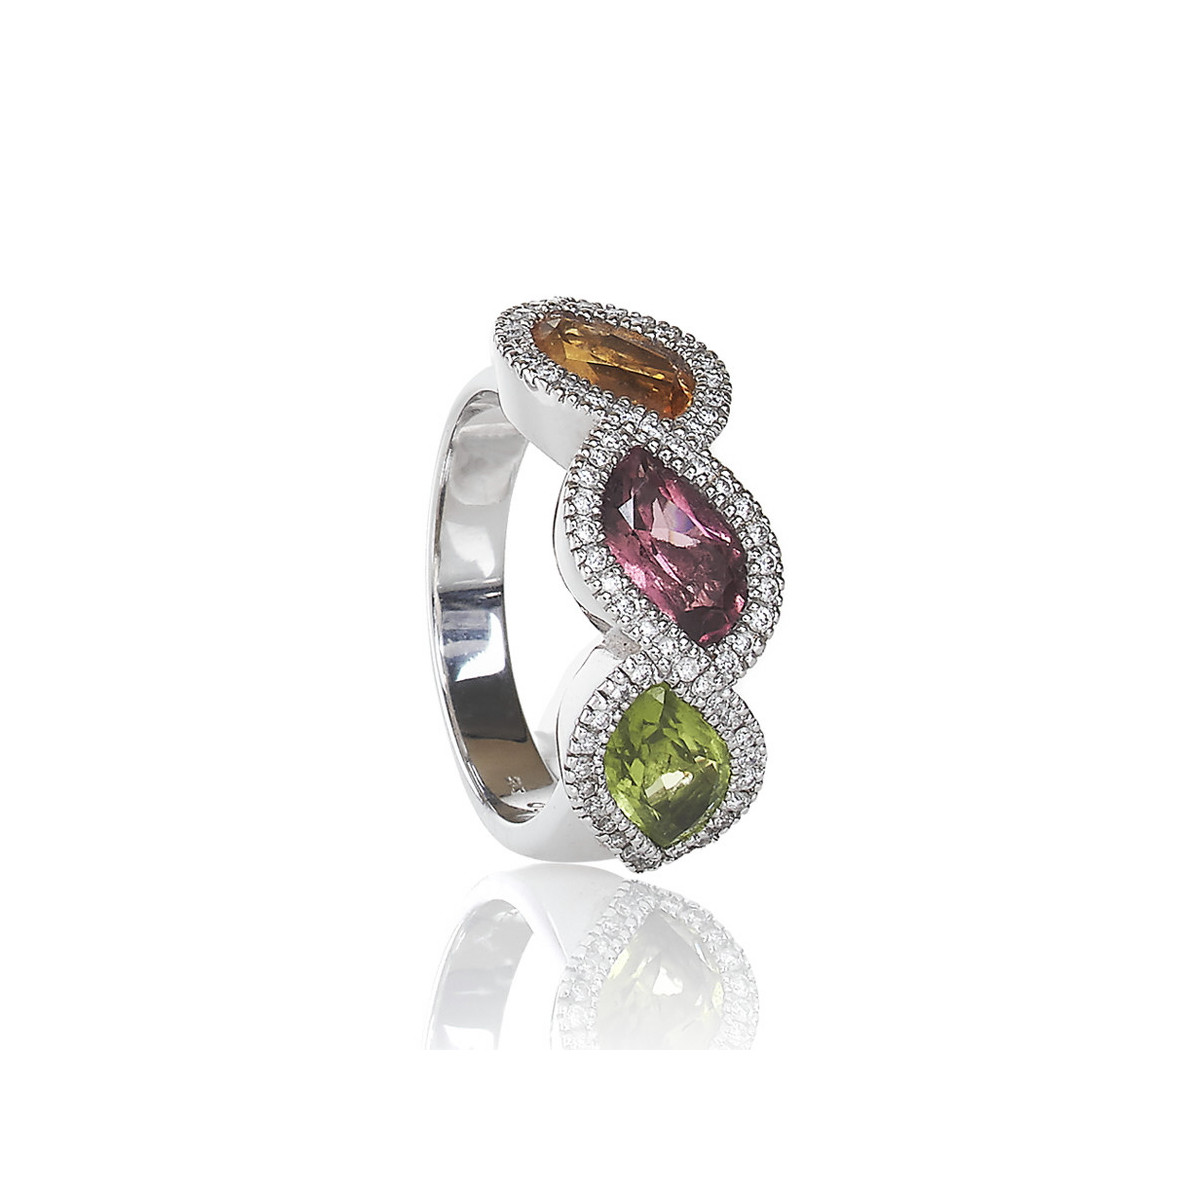 GOLD DIAMONDS AND 3 COLORS STONES RING